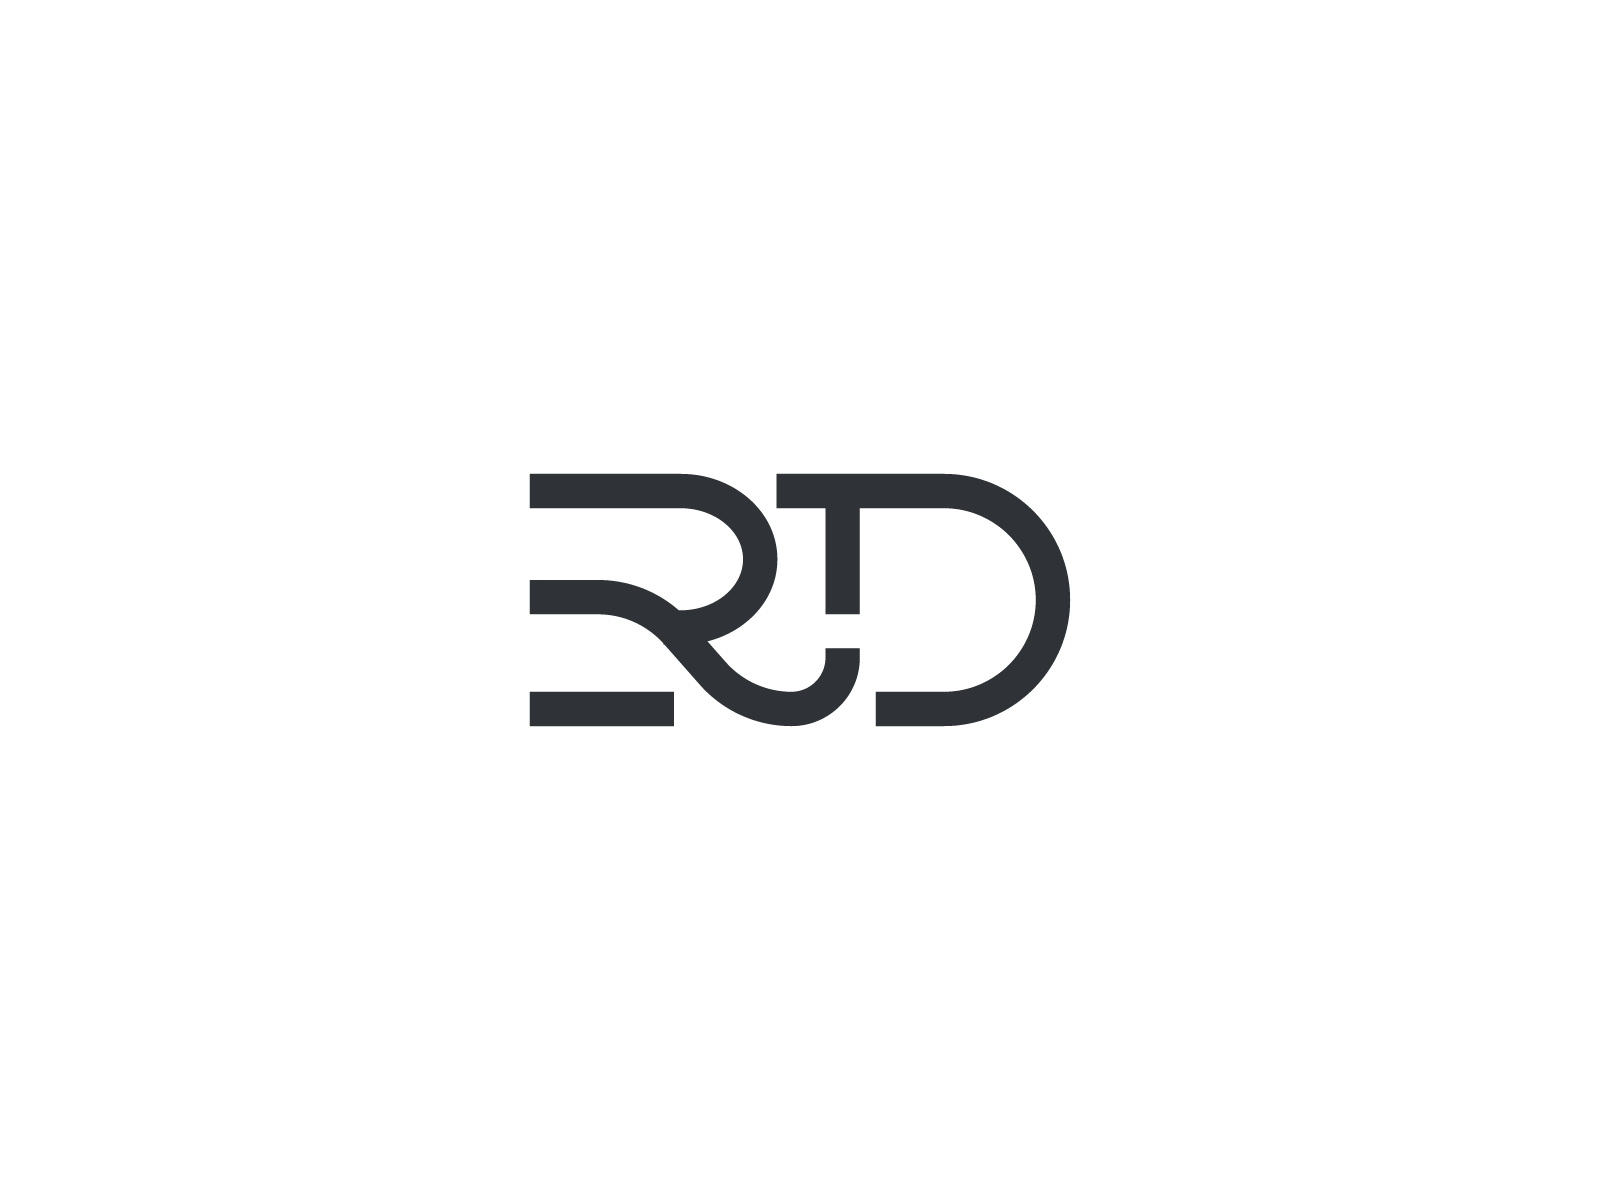 RD-2 by Pavel Diaz on Dribbble